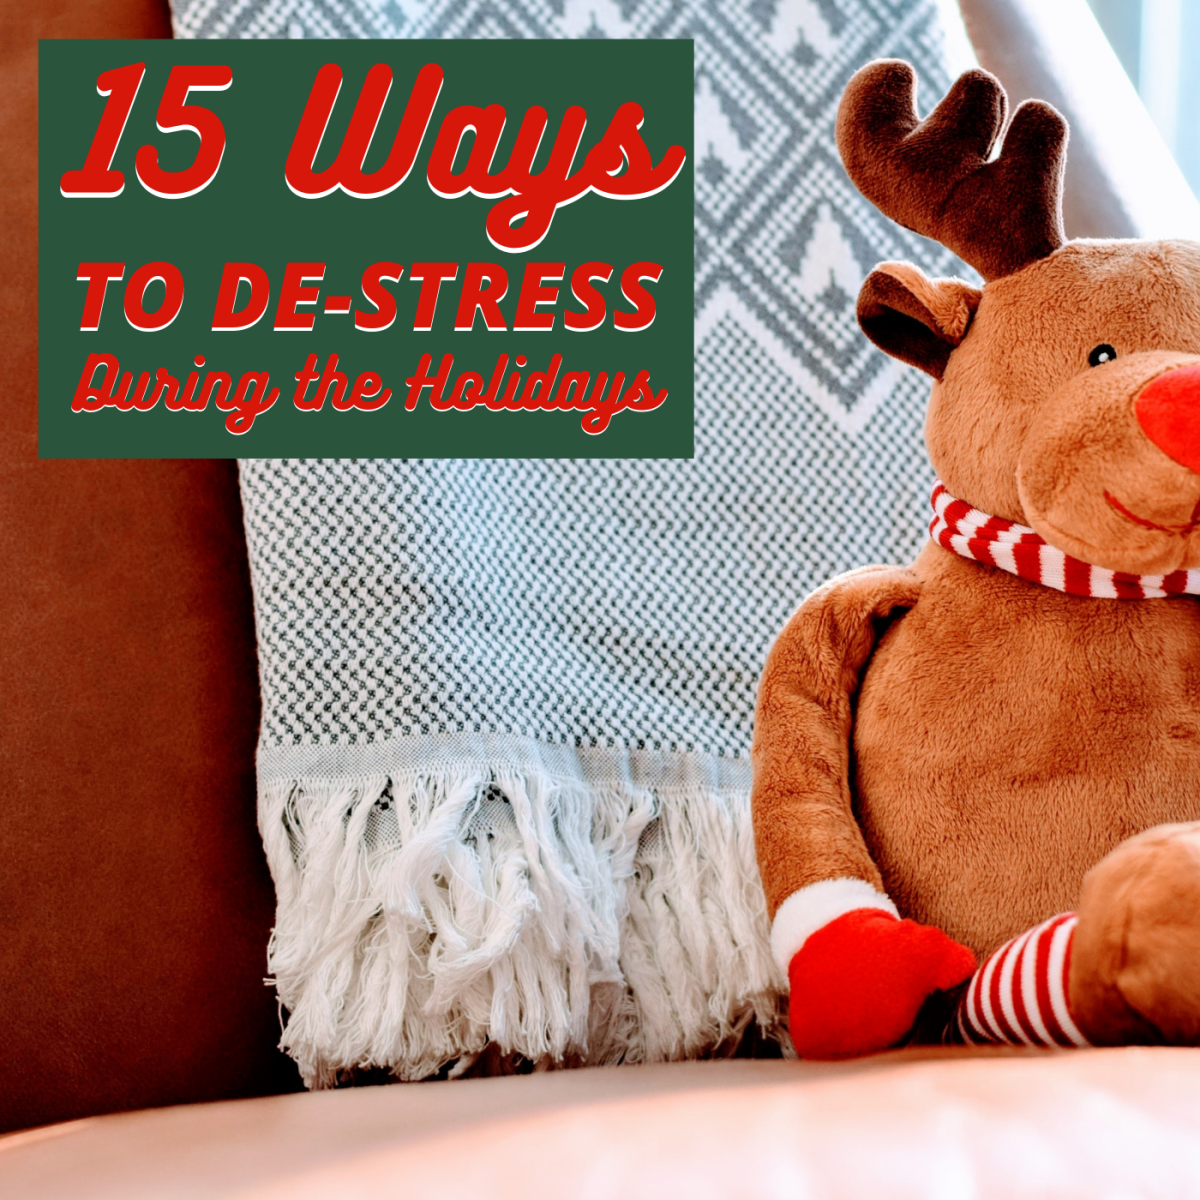 15 Free/Inexpensive Ways to Lift Your Mood During the Holidays